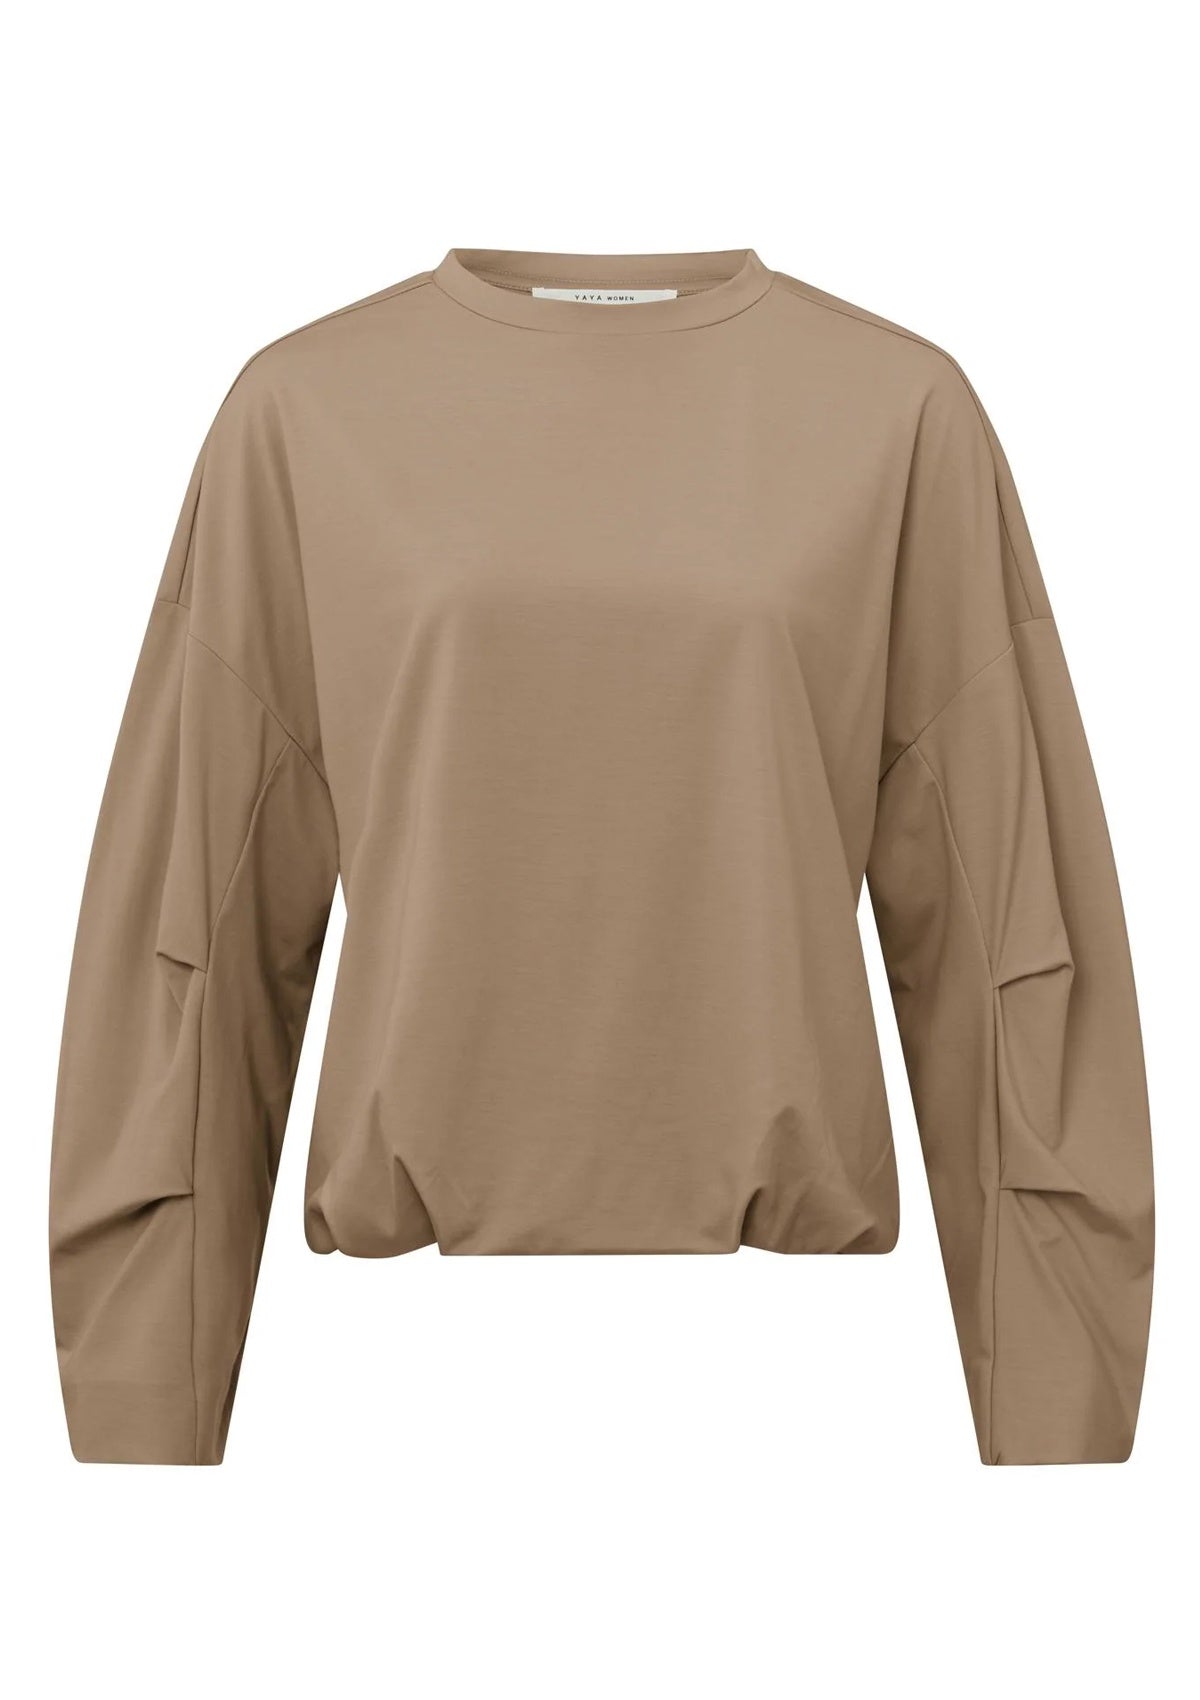 YAYA Top With Crewneck, Long Sleeves & Pleated Details Affogato Brown